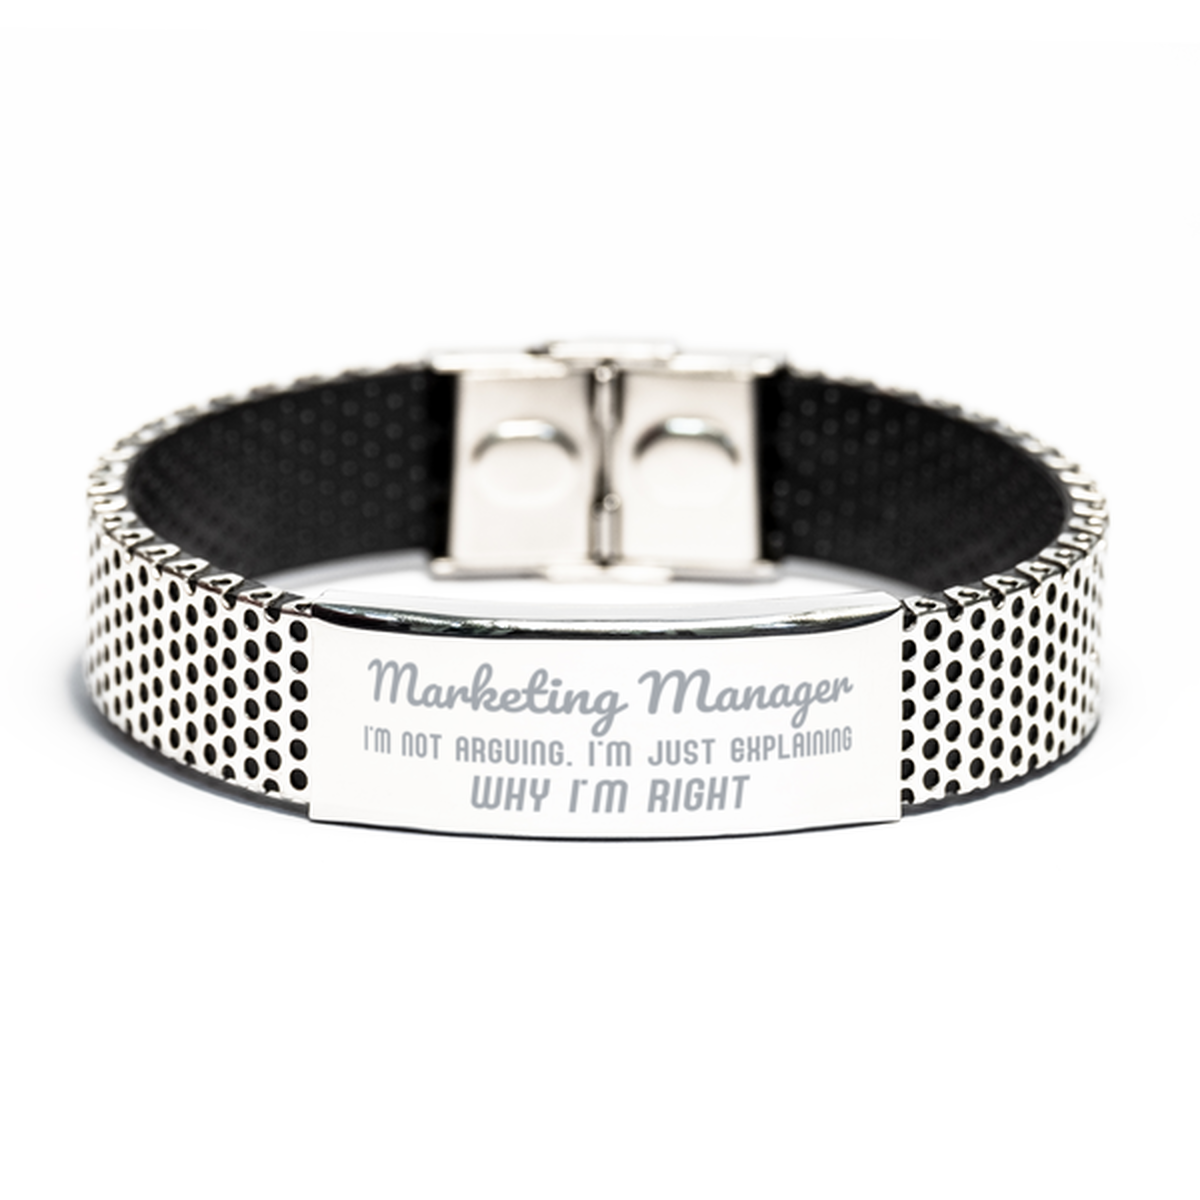 Marketing Manager I'm not Arguing. I'm Just Explaining Why I'm RIGHT Stainless Steel Bracelet, Funny Saying Quote Marketing Manager Gifts For Marketing Manager Graduation Birthday Christmas Gifts for Men Women Coworker